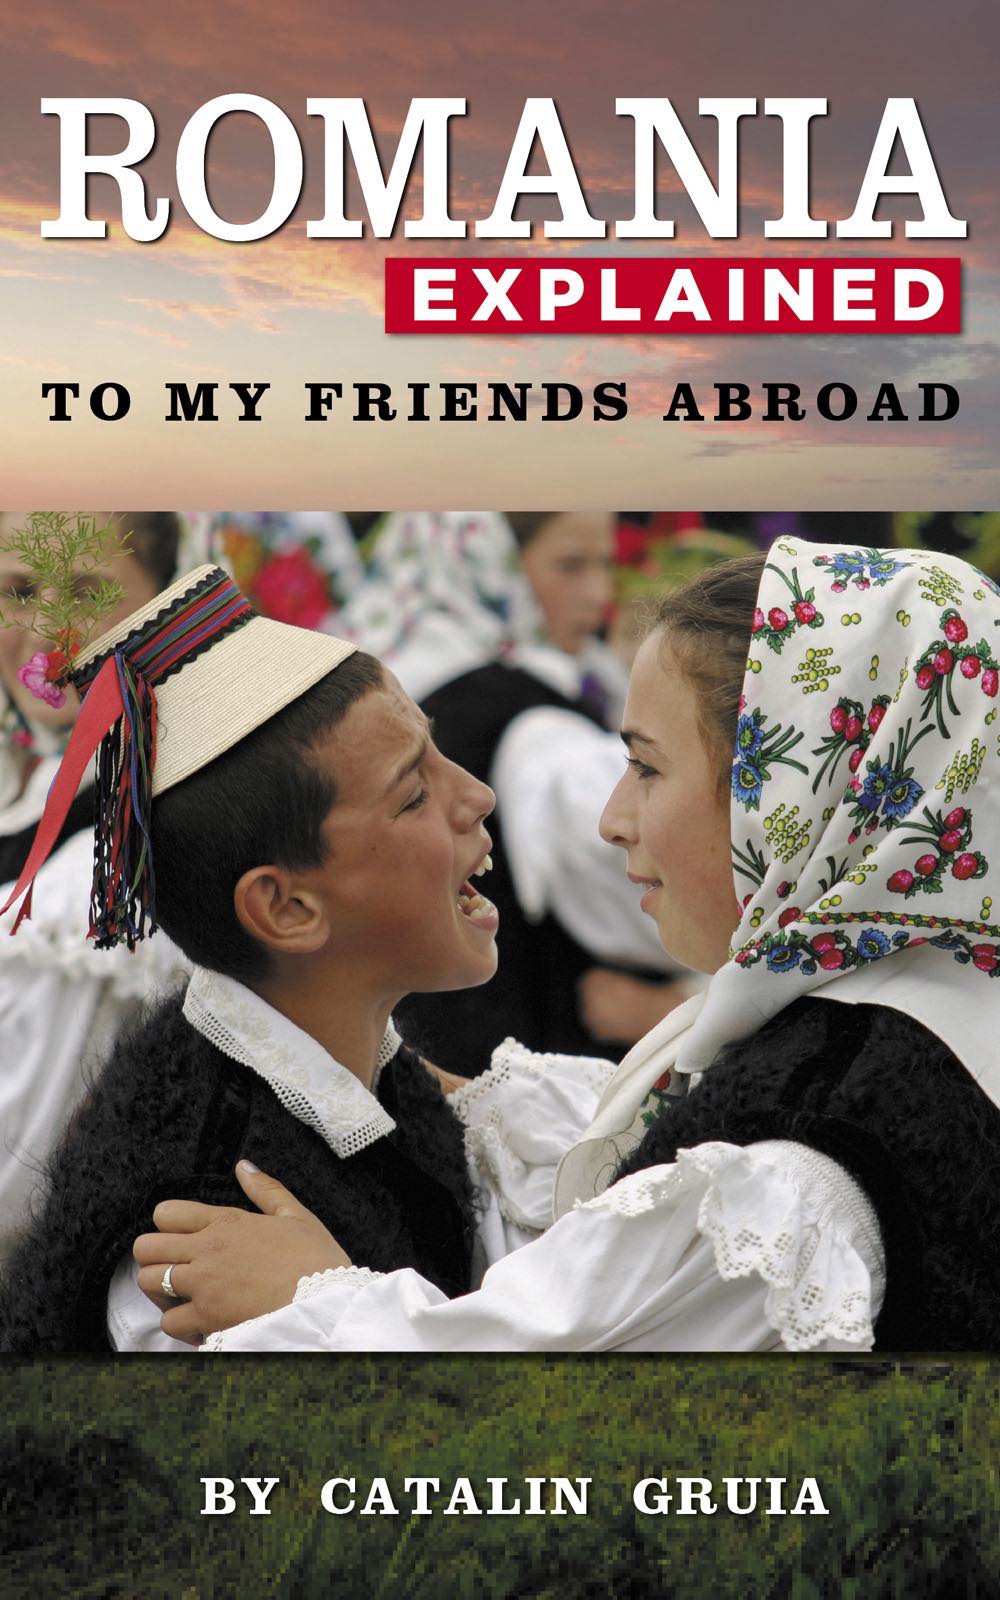 FREE: ROMANIA EXPLAINED TO MY FRIENDS ABROAD by Catalin Gruia